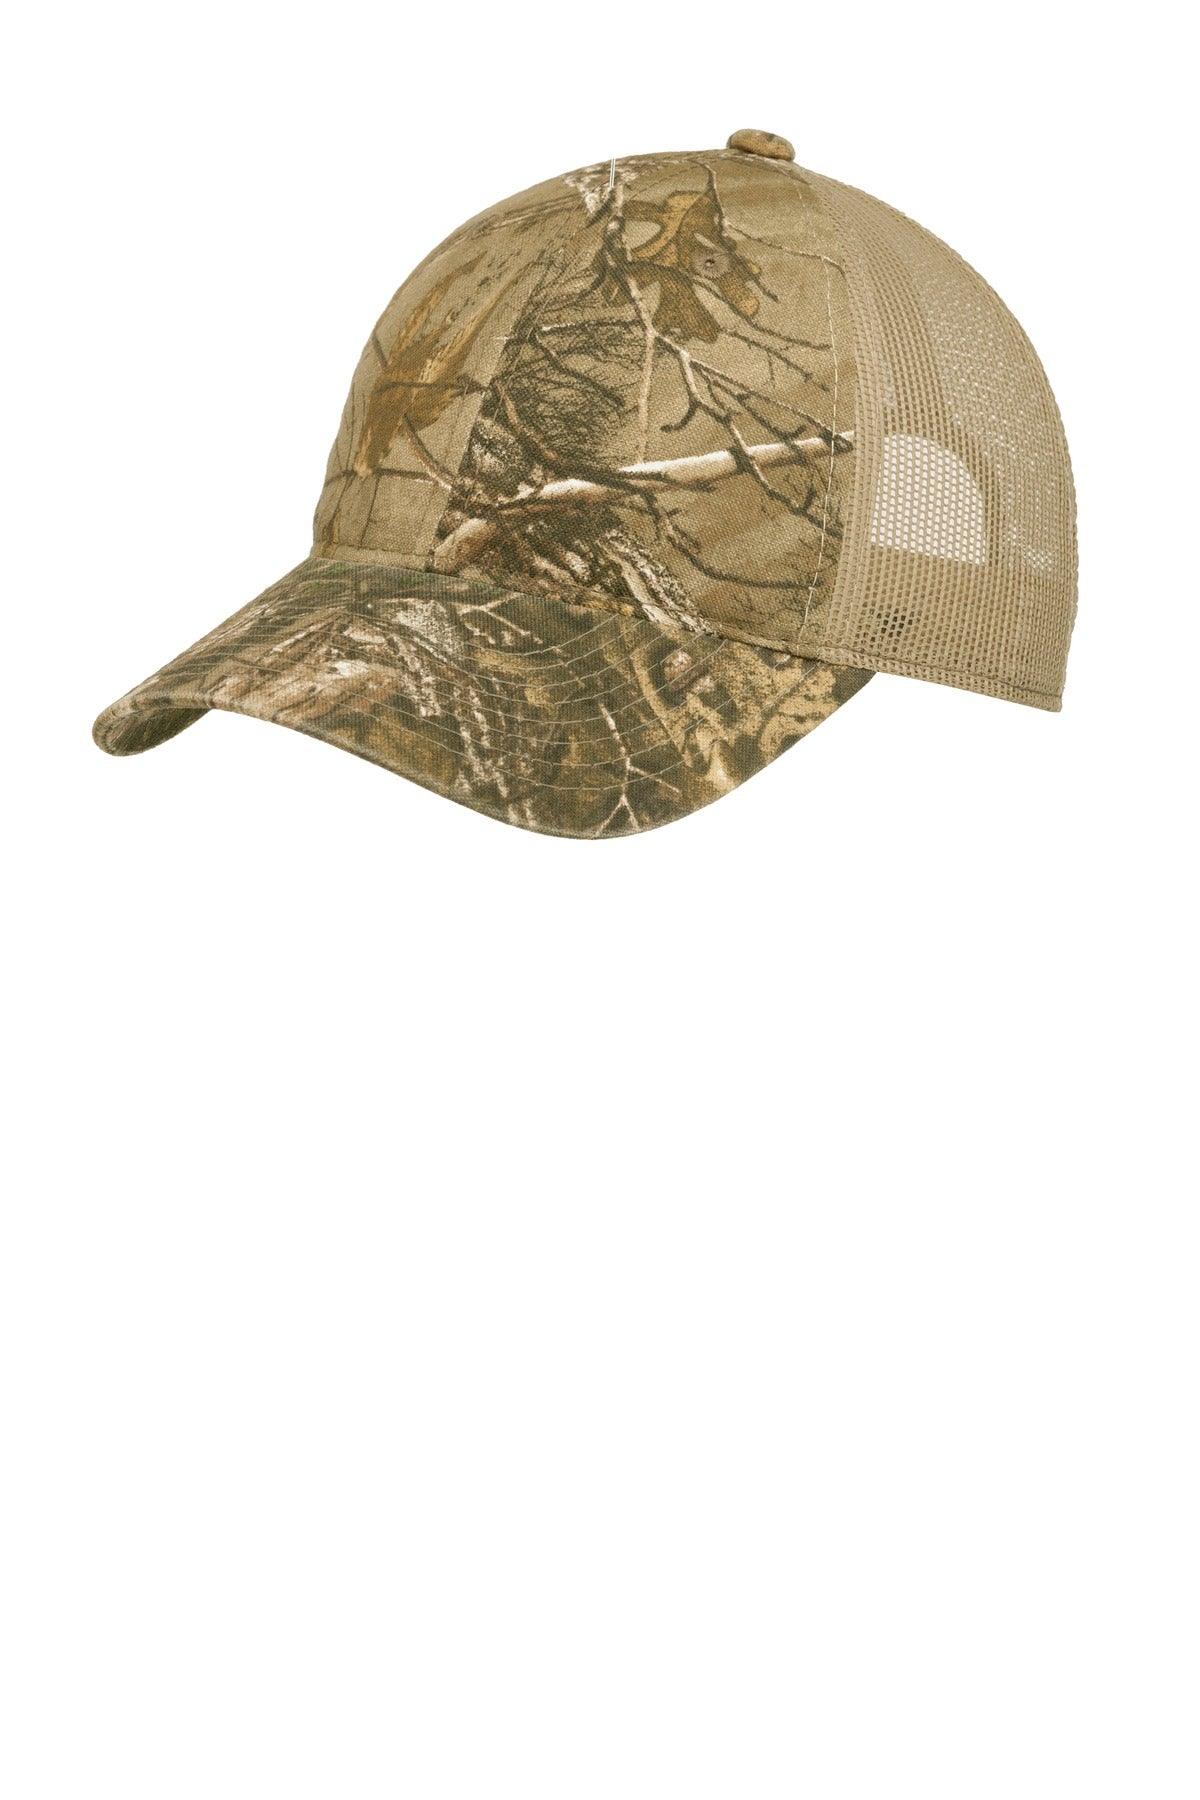 Port Authority Unstructured Camouflage Mesh Back Cap. C929 - Dresses Max